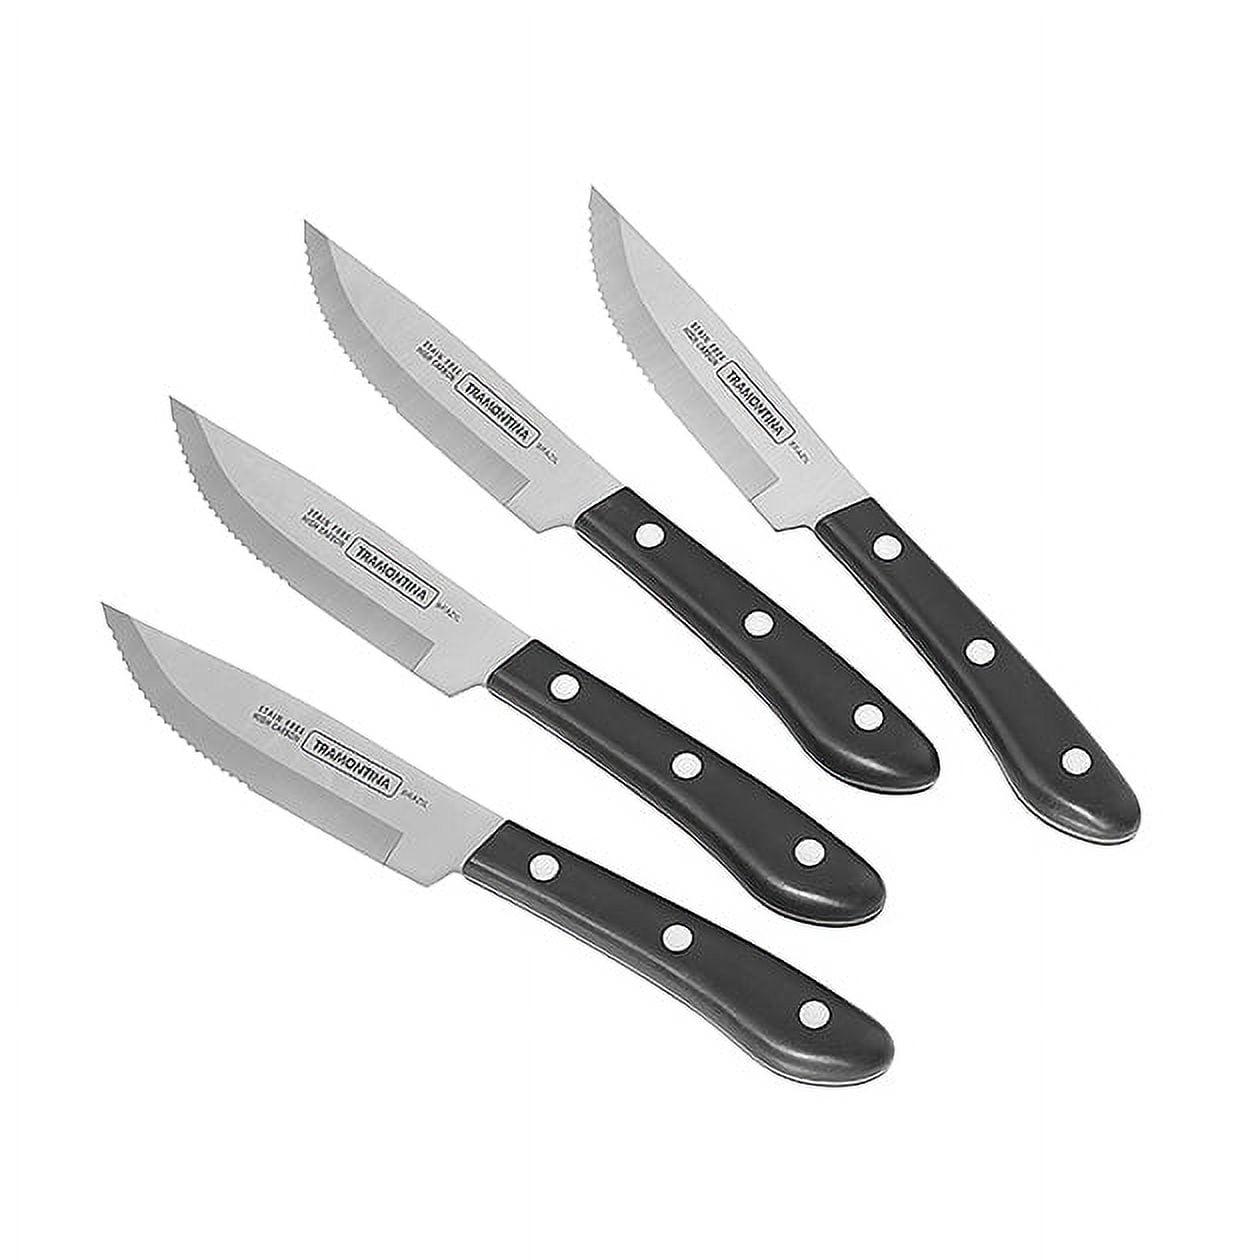  Tramontina A-500DS Porterhouse Stainless Steel 4-Piece Steak  Knife Set, Rounded Tip, Hardwood Handle, Made in Brazil : Toys & Games